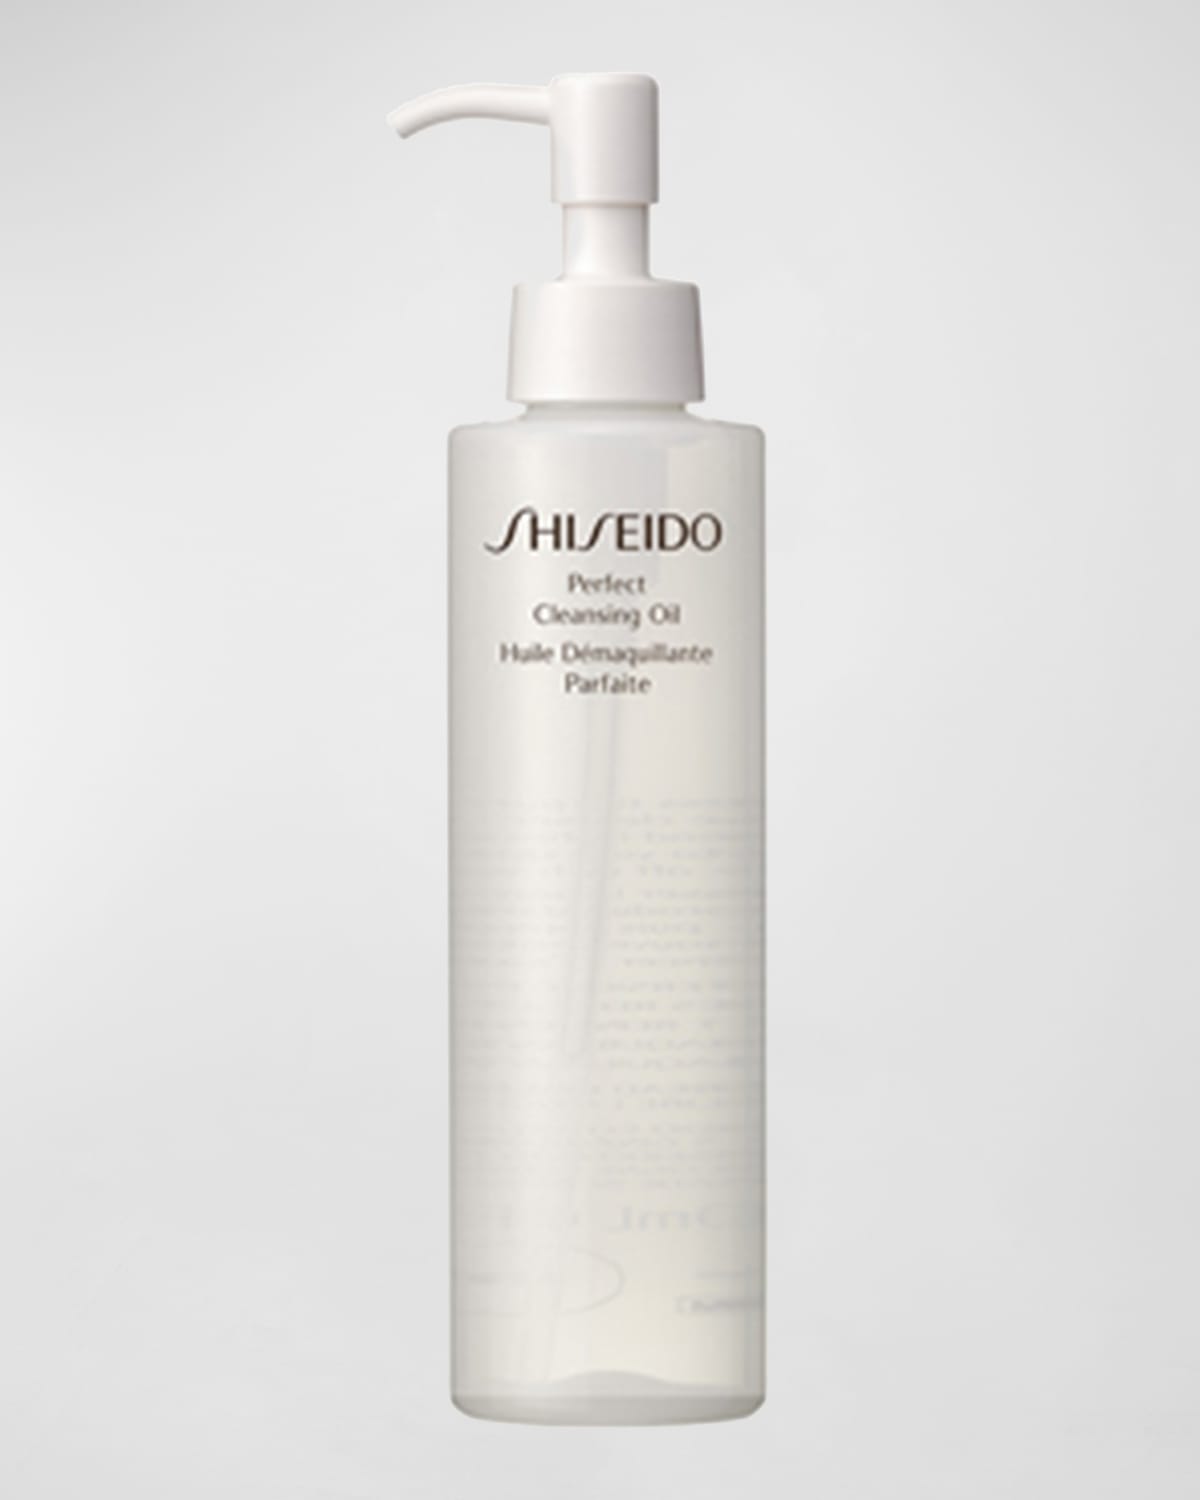 Perfect Cleansing Oil, 10 oz.